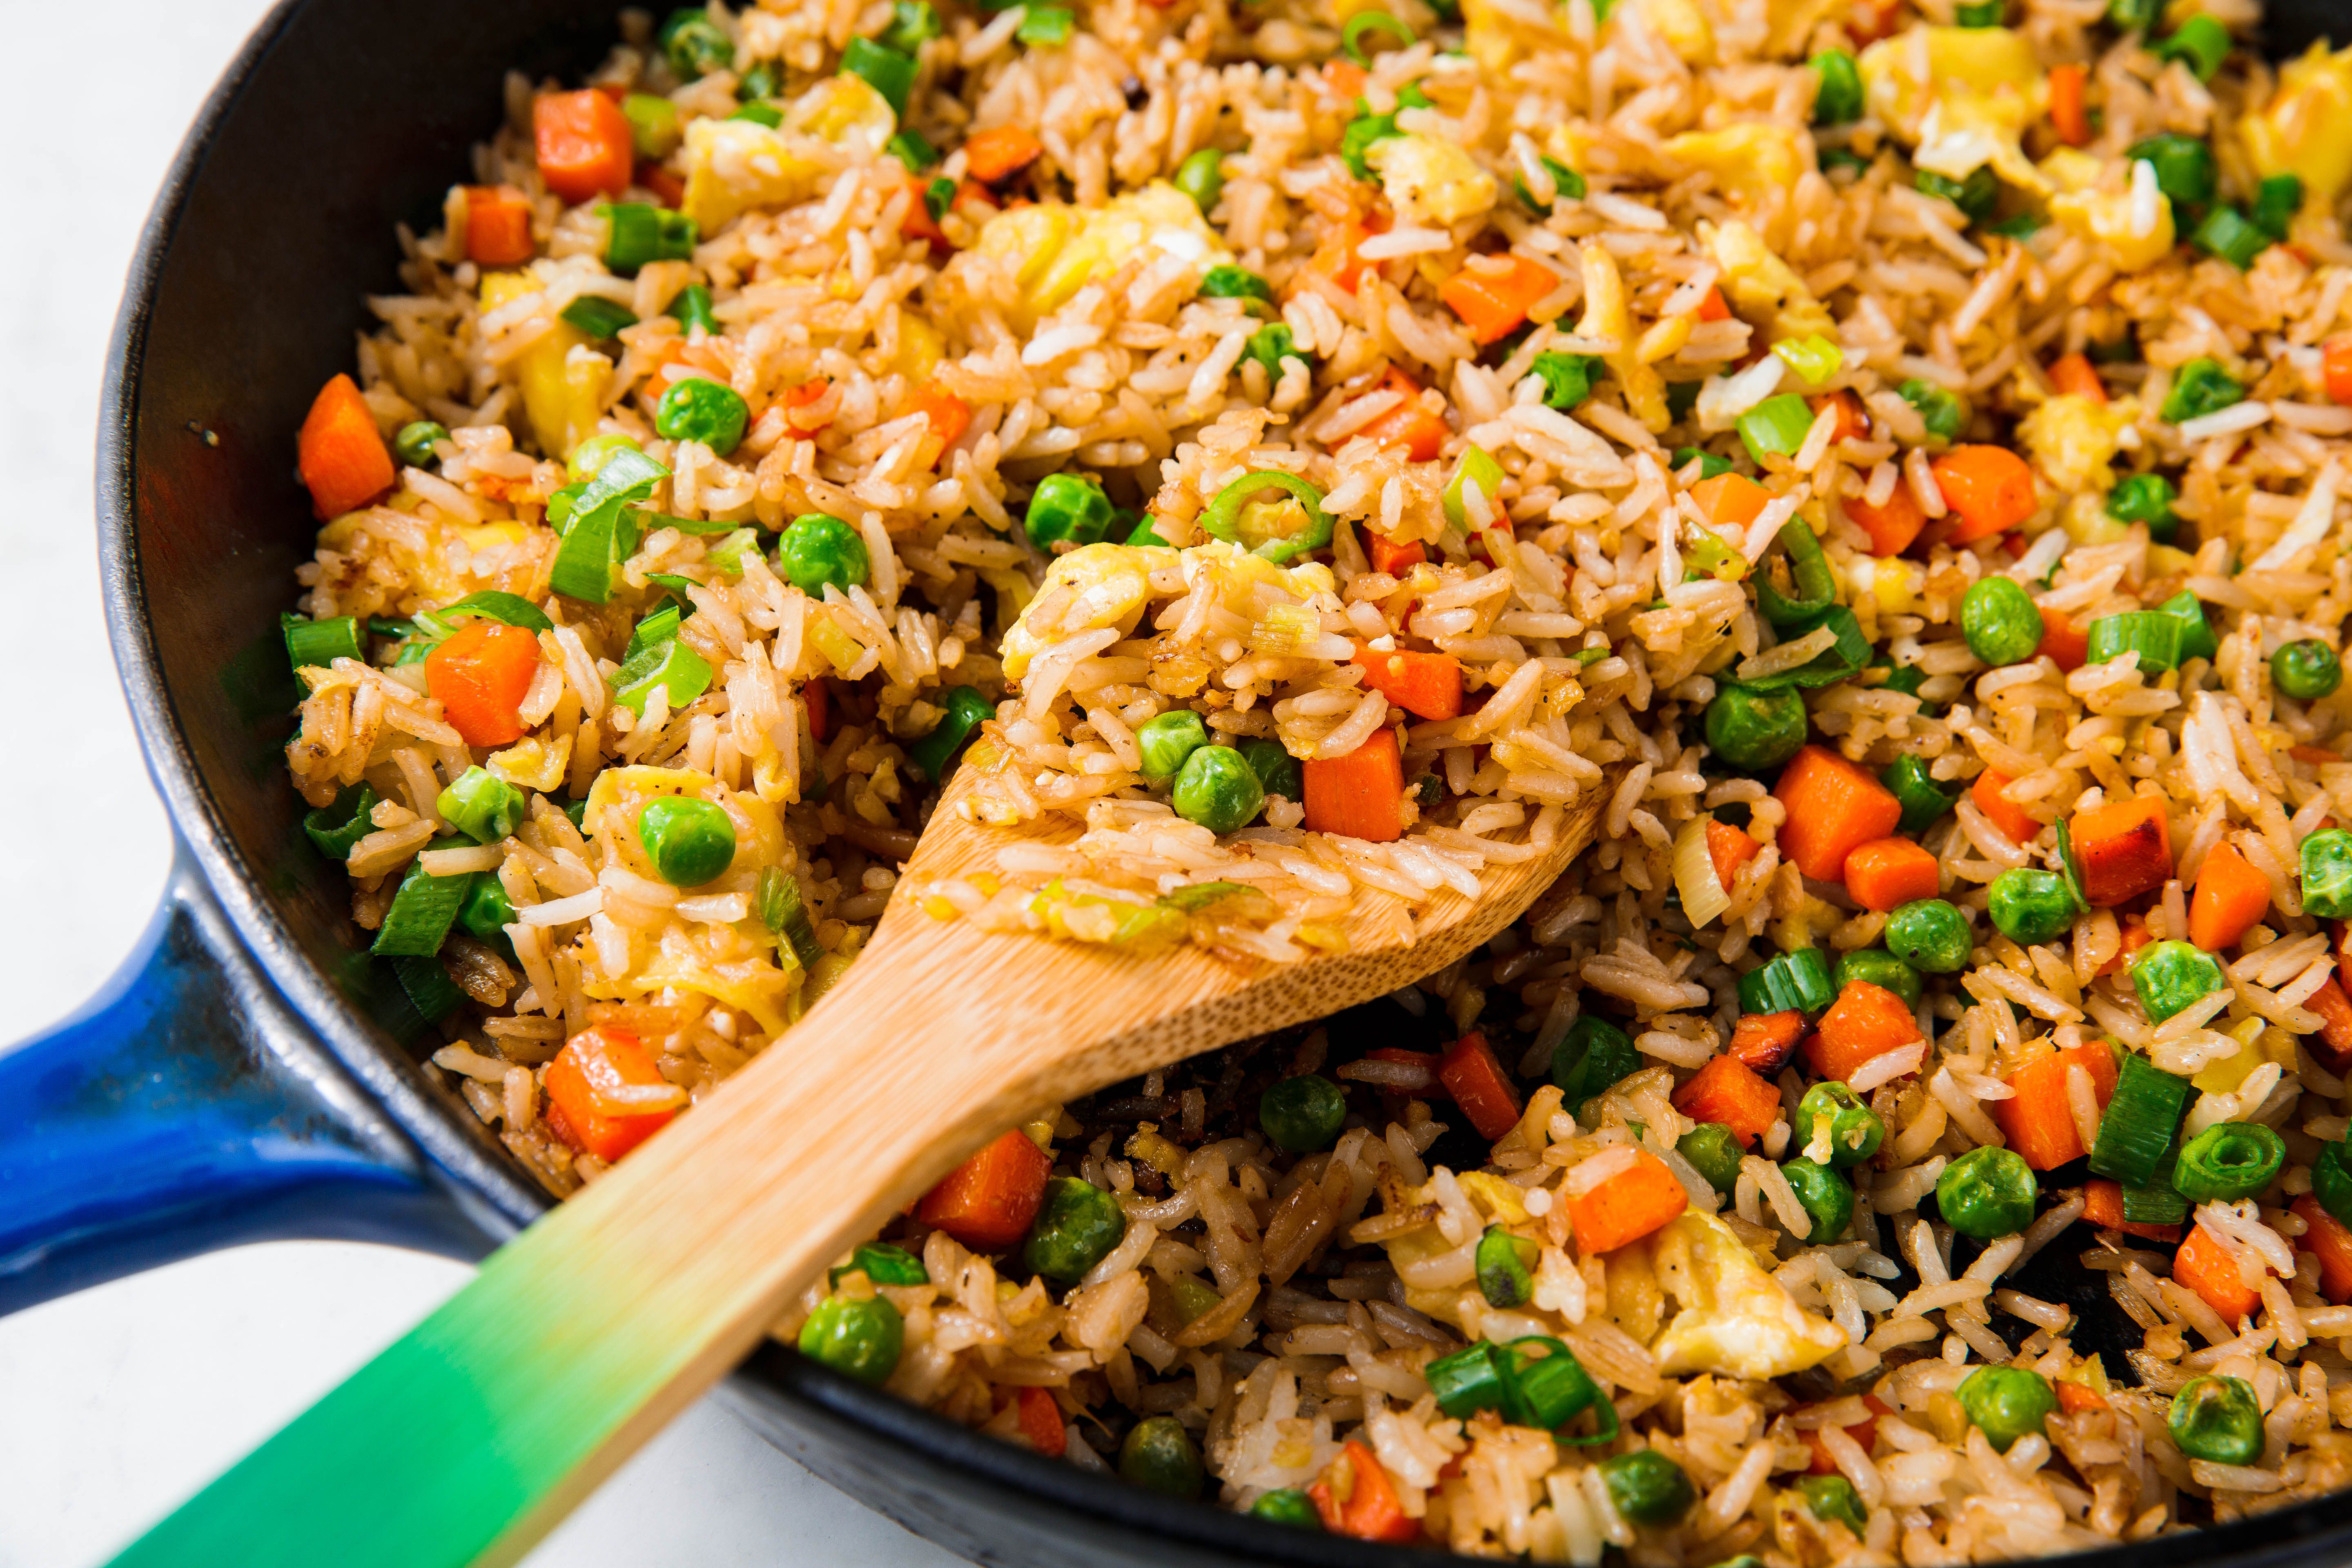 expository essay on how to prepare fried rice